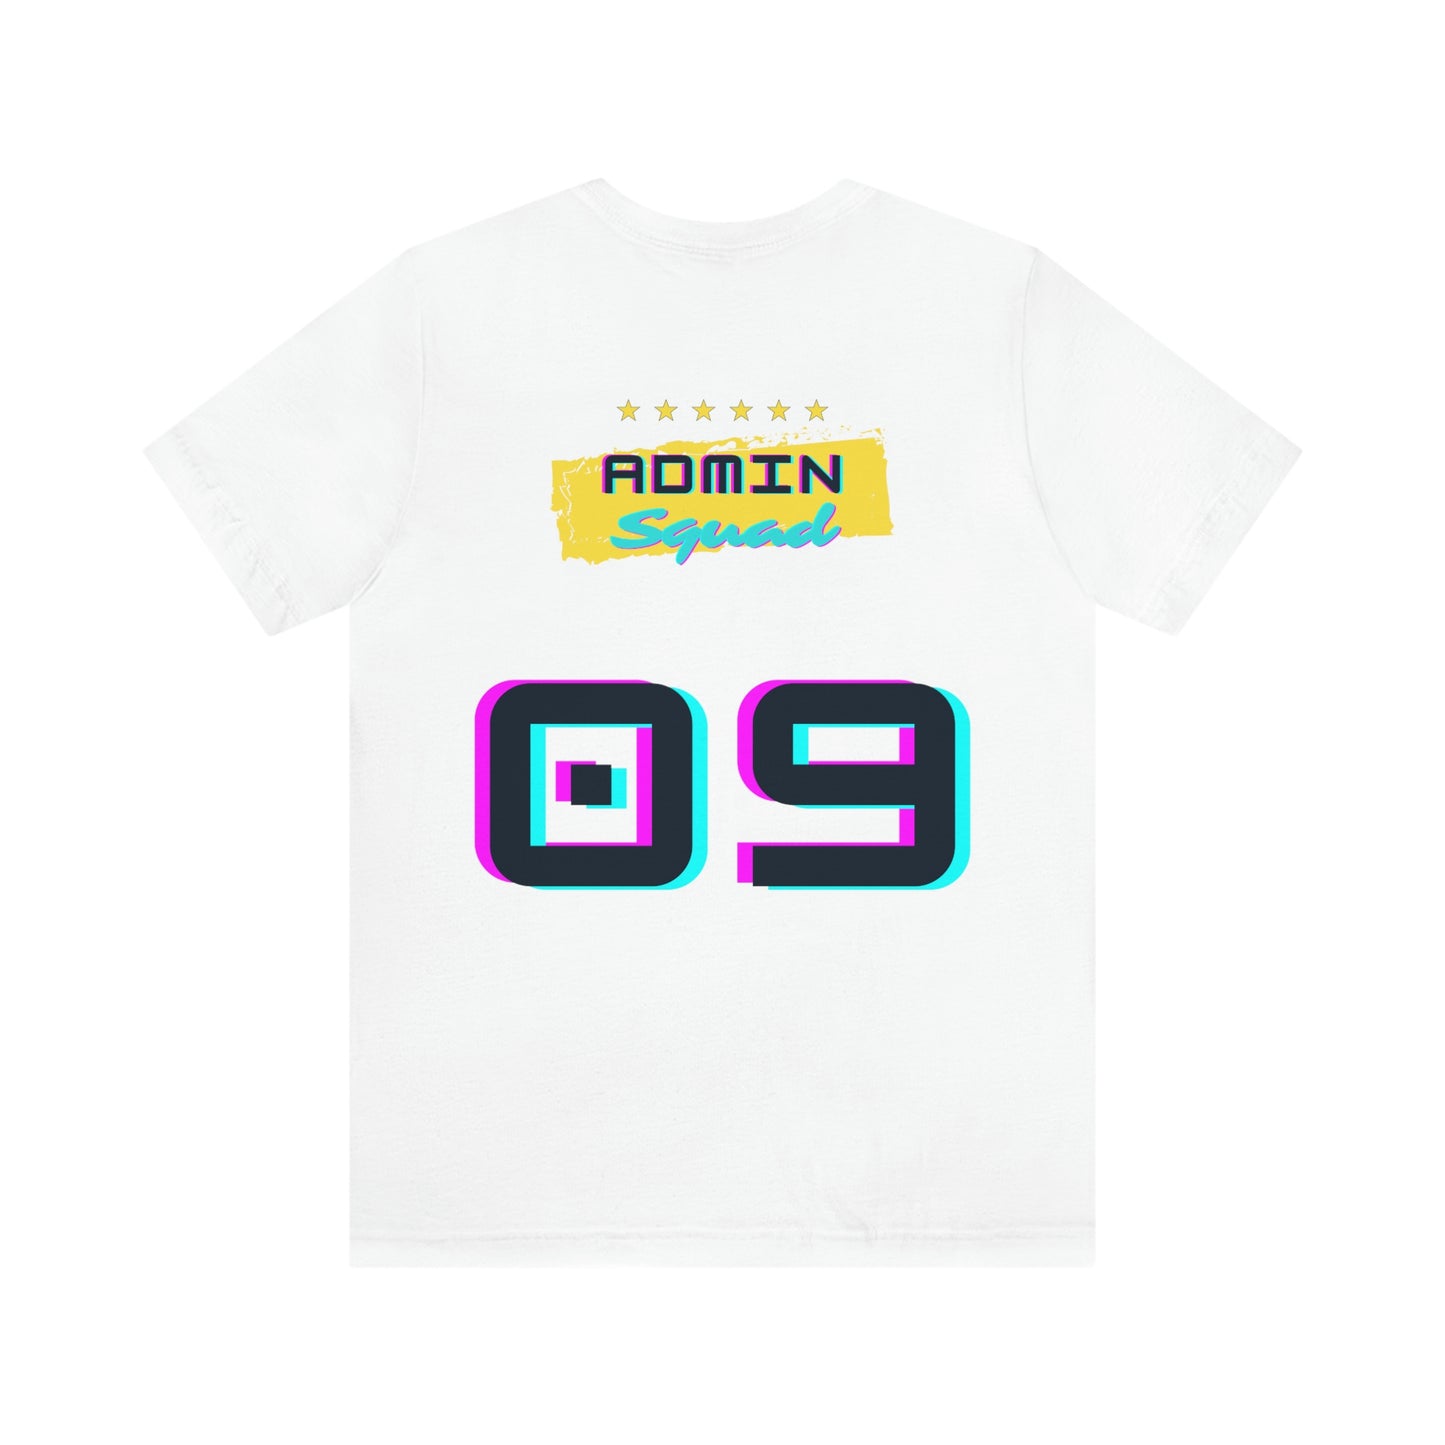 Admin Office Team T-Shirt - Jersey│Made in USA │Unisex - Men and Women's Cotton Tee │Administration 09 Team Sports Work